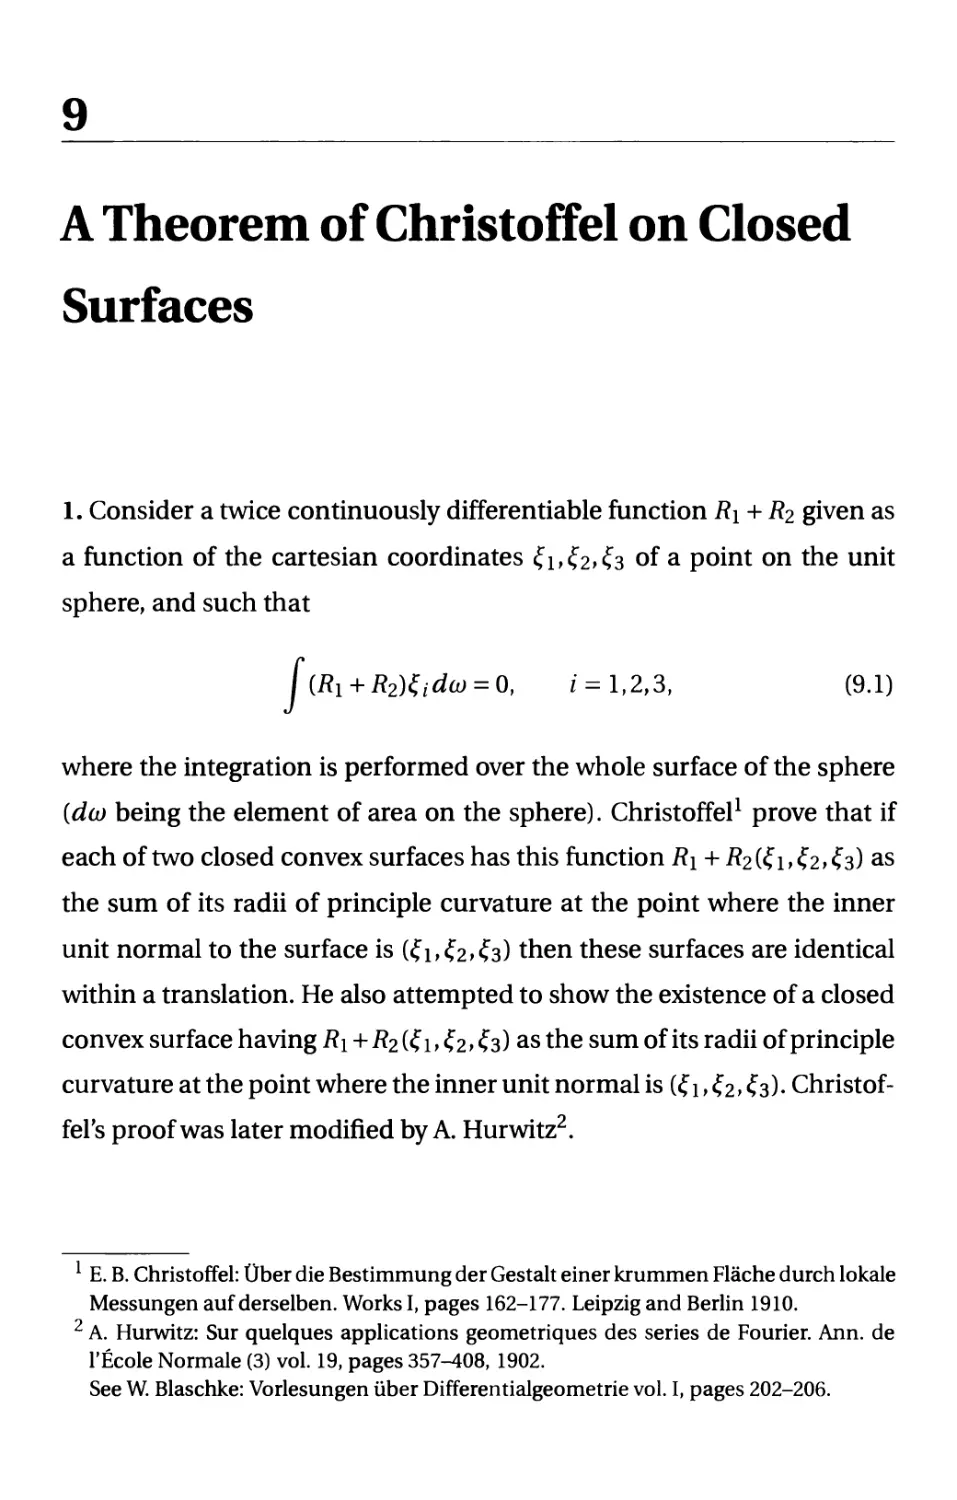 9. A Theorem of Christoffel on Closed Surfaces